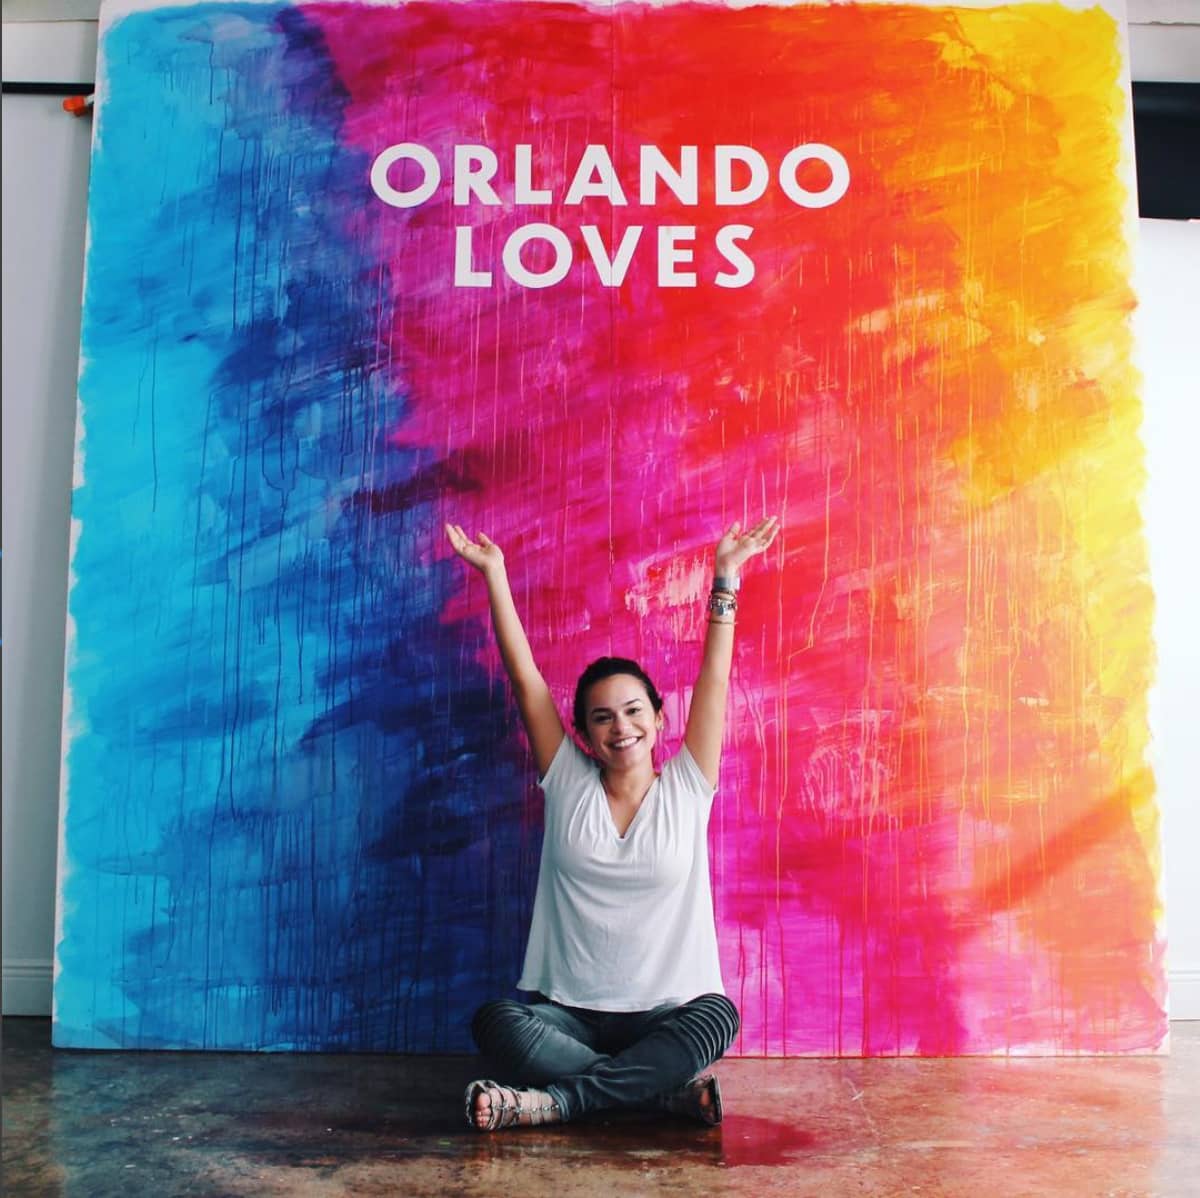 Orlando Loves hand painted rainbow backdrop for Zebra Coalition by Hillery Powers